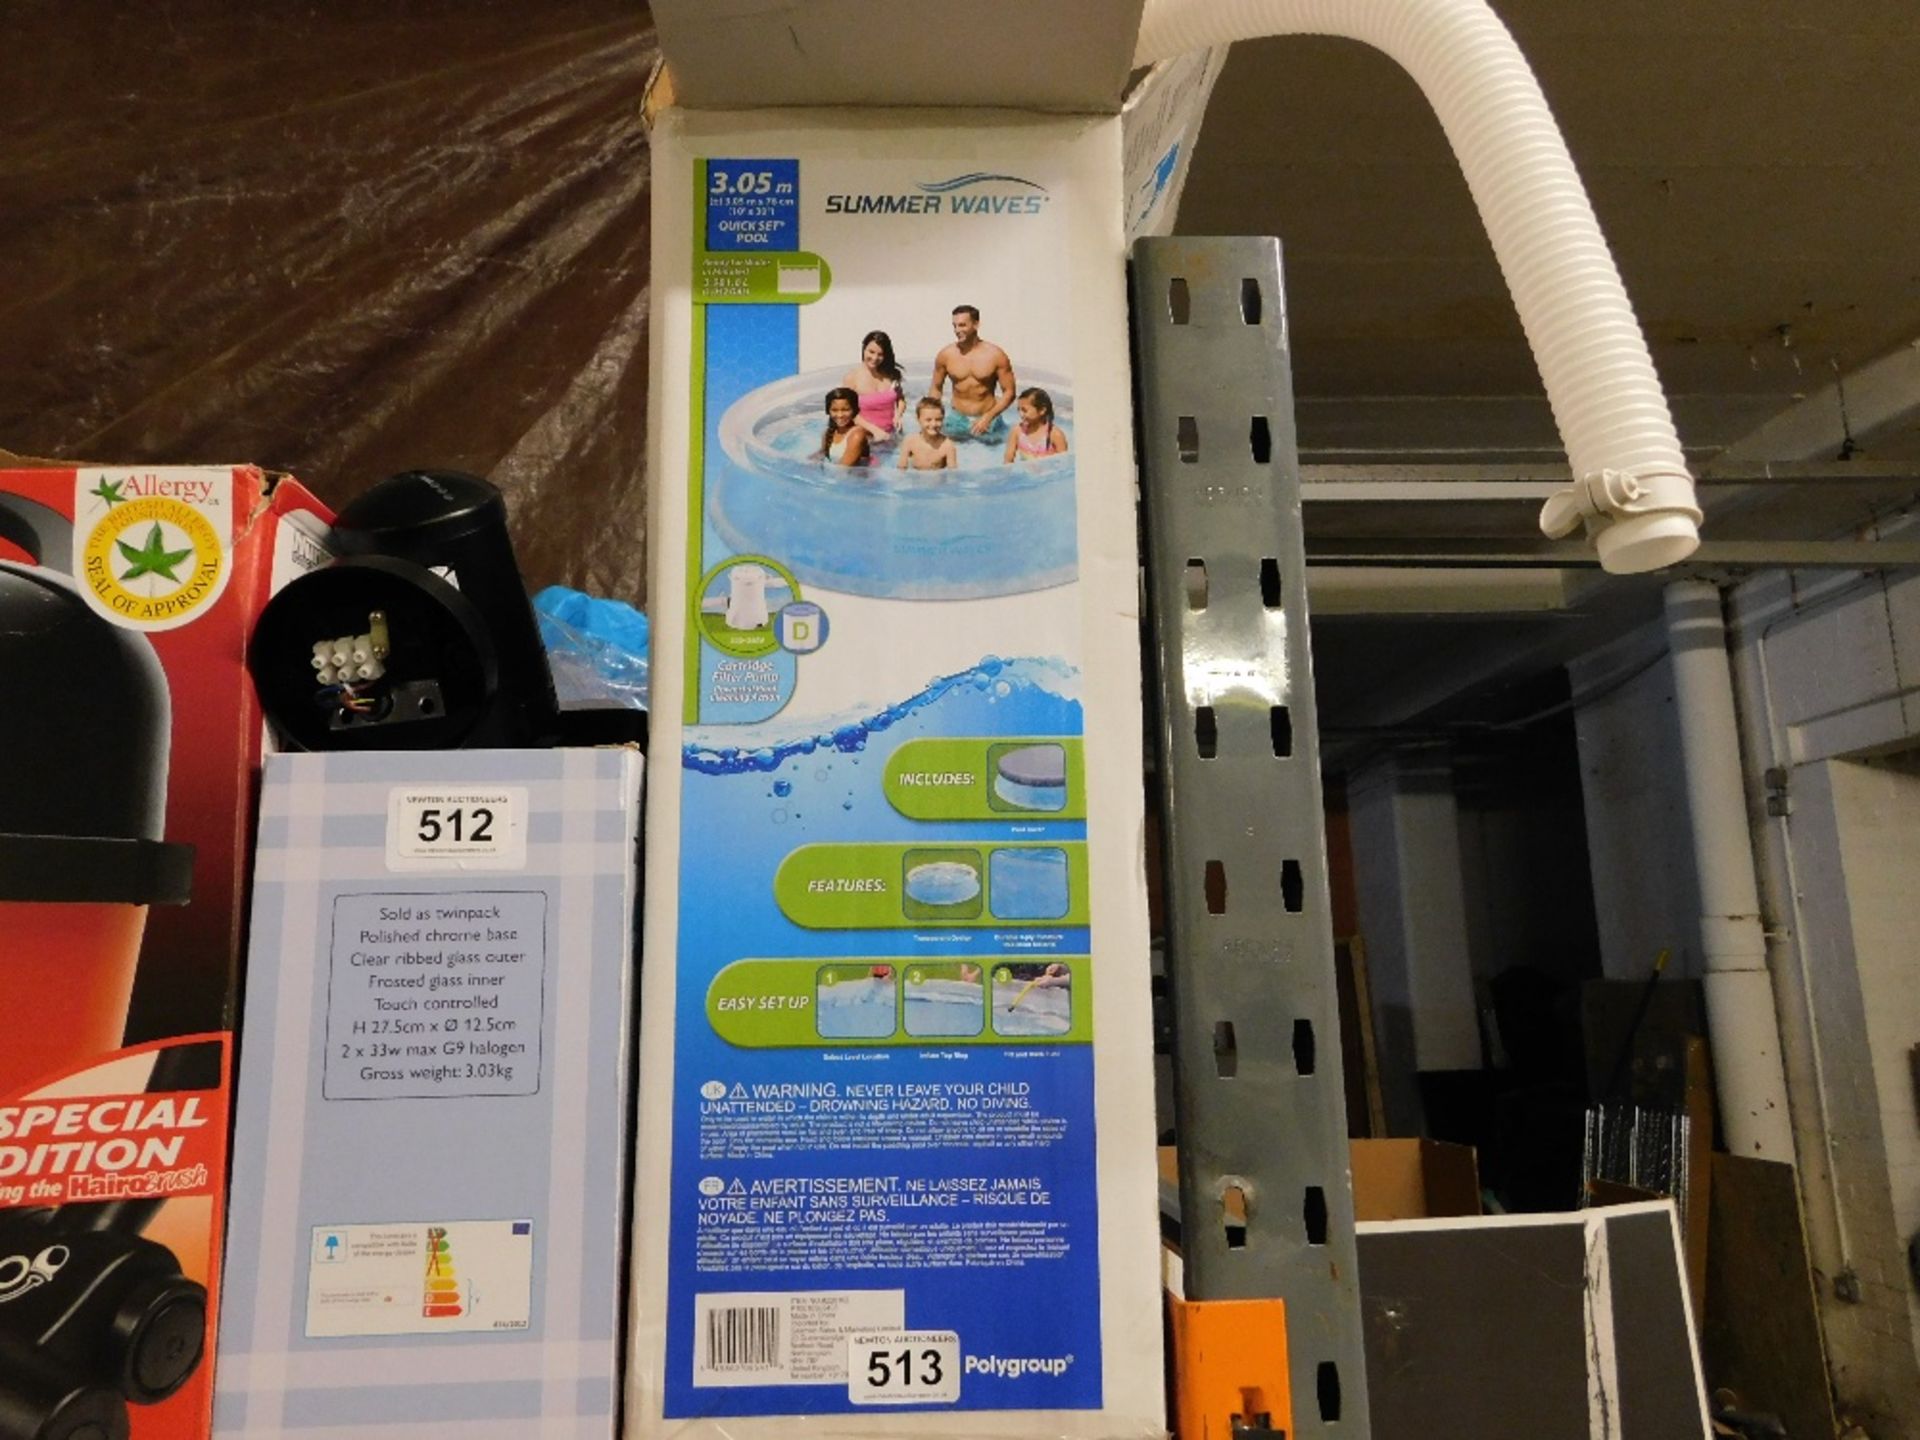 1 BOXED POLYGROUP SUMMER WAVES 3.05Mx76CM SWIMMING POOL SET RRP £64.99